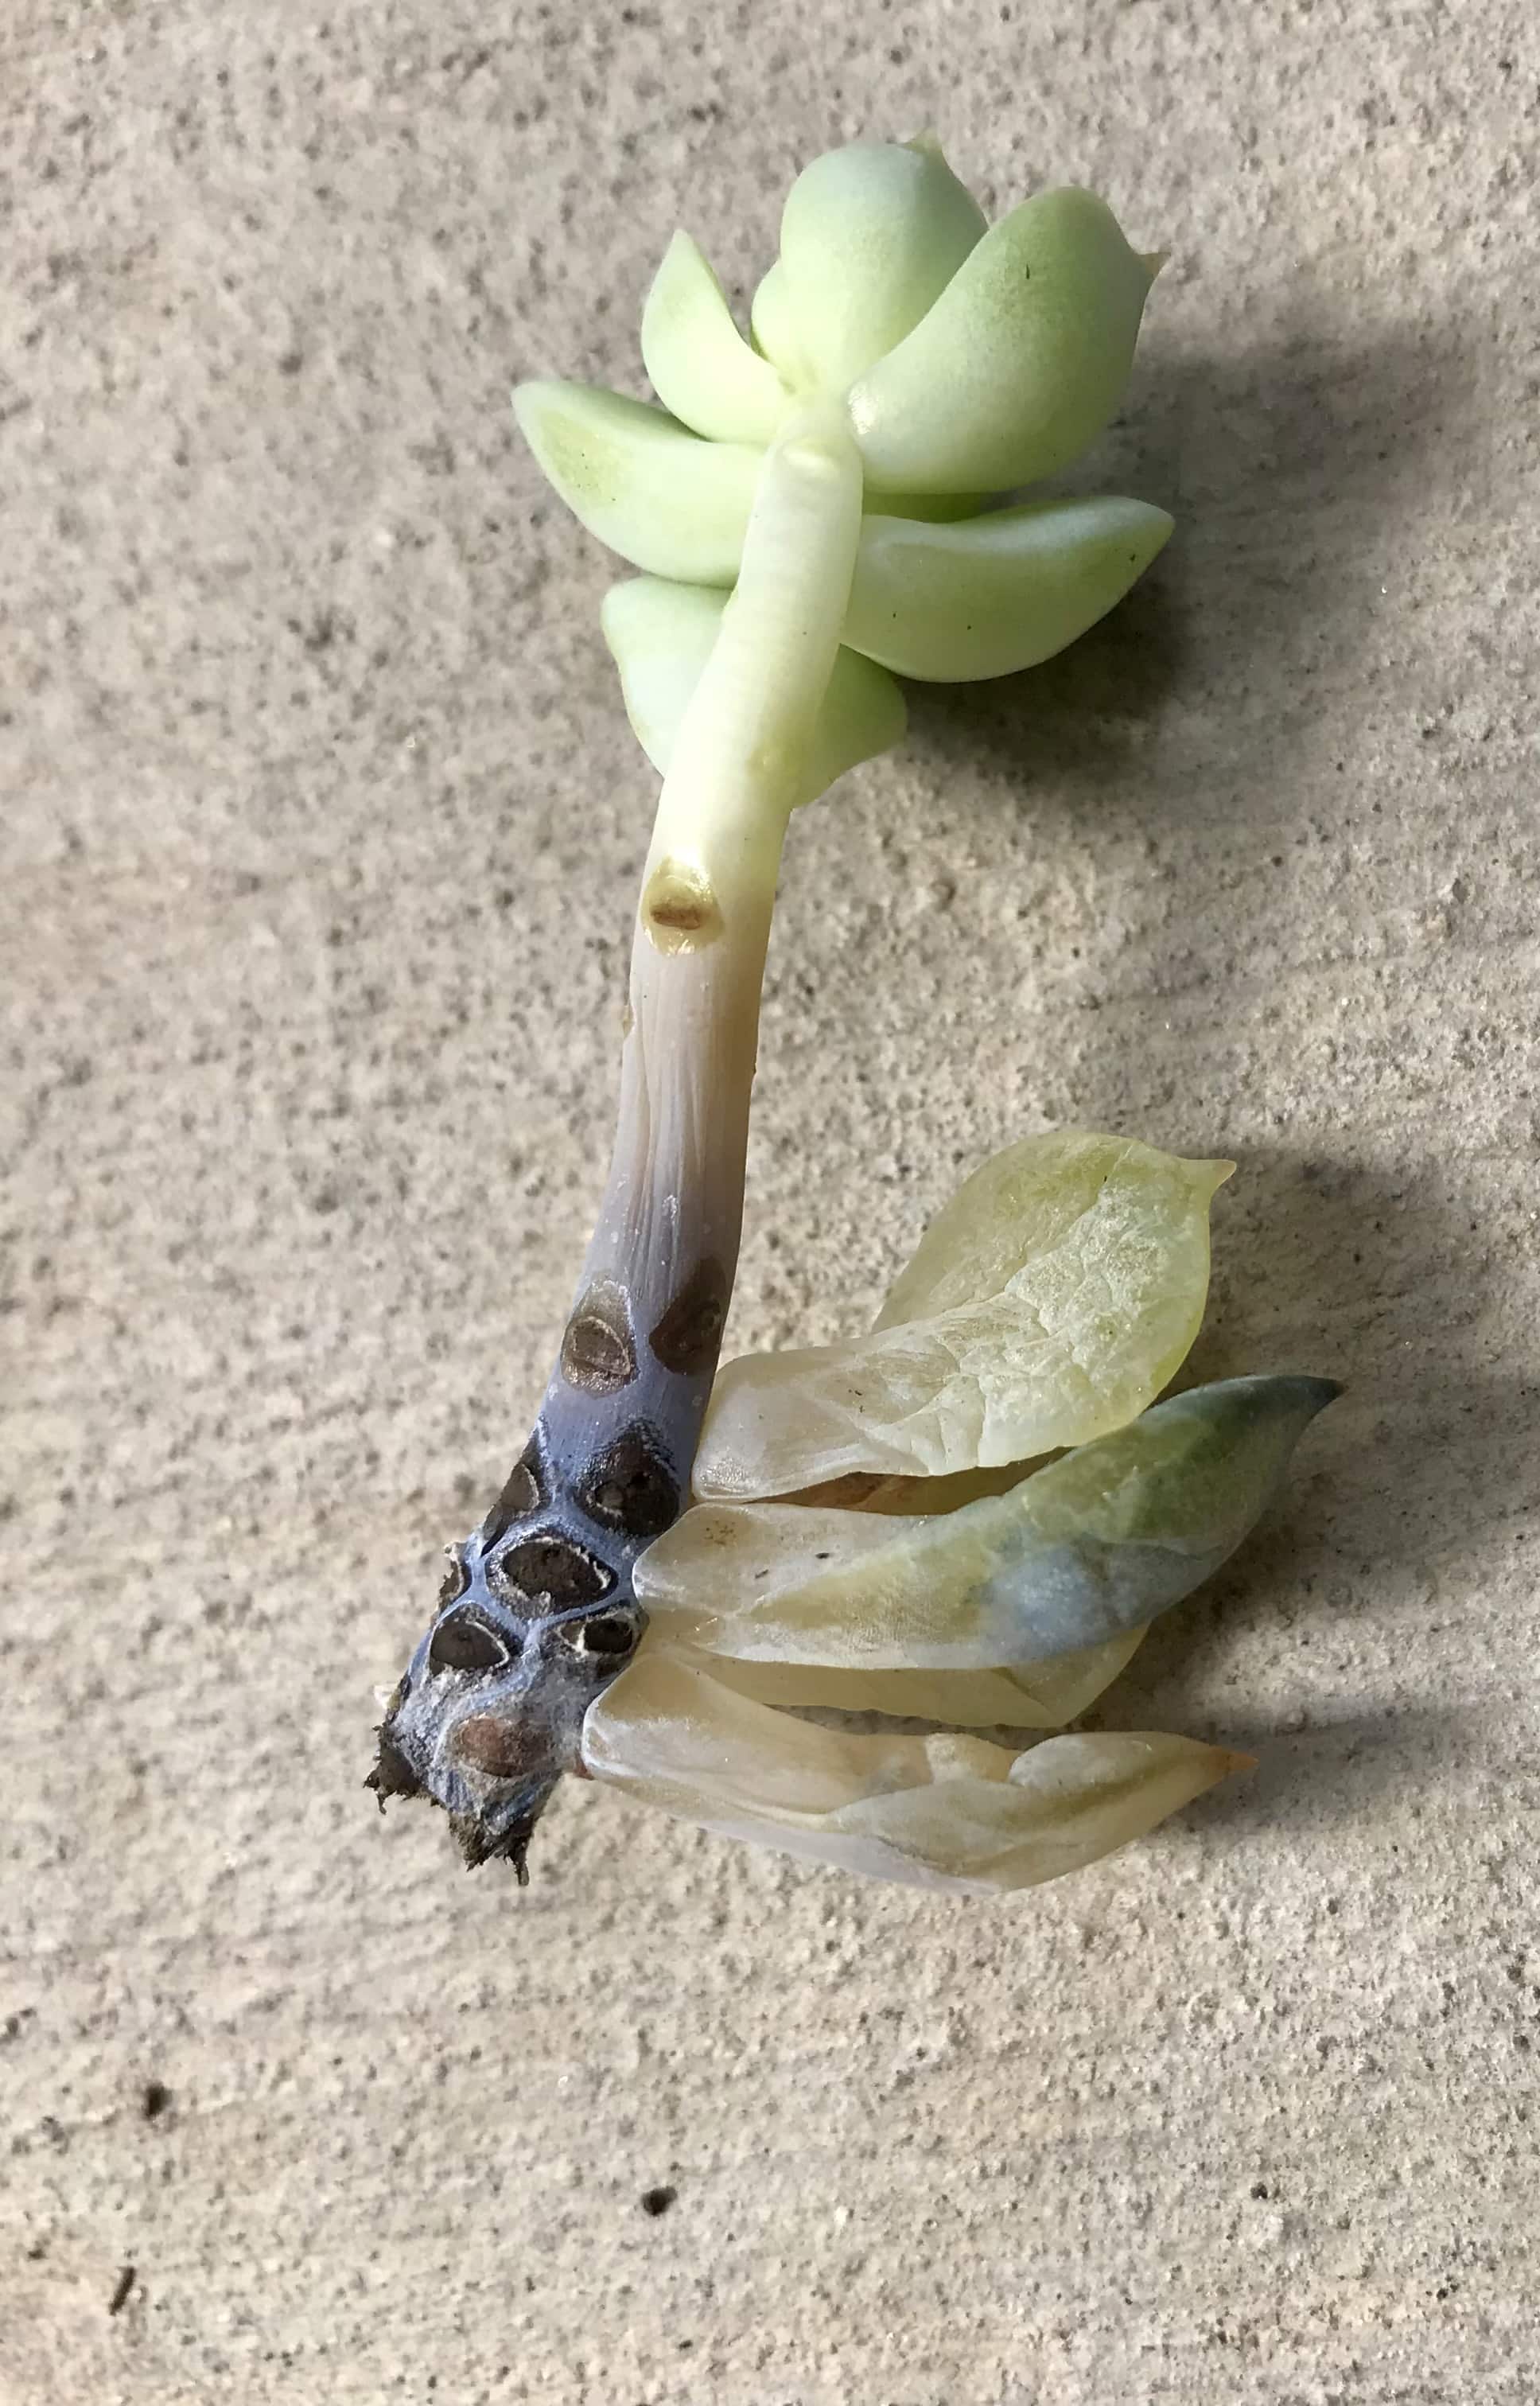 Rosette succulent with bare stem. Bare stem is black and rotted, along with a few bottom leaves that appear mushy and translucent.